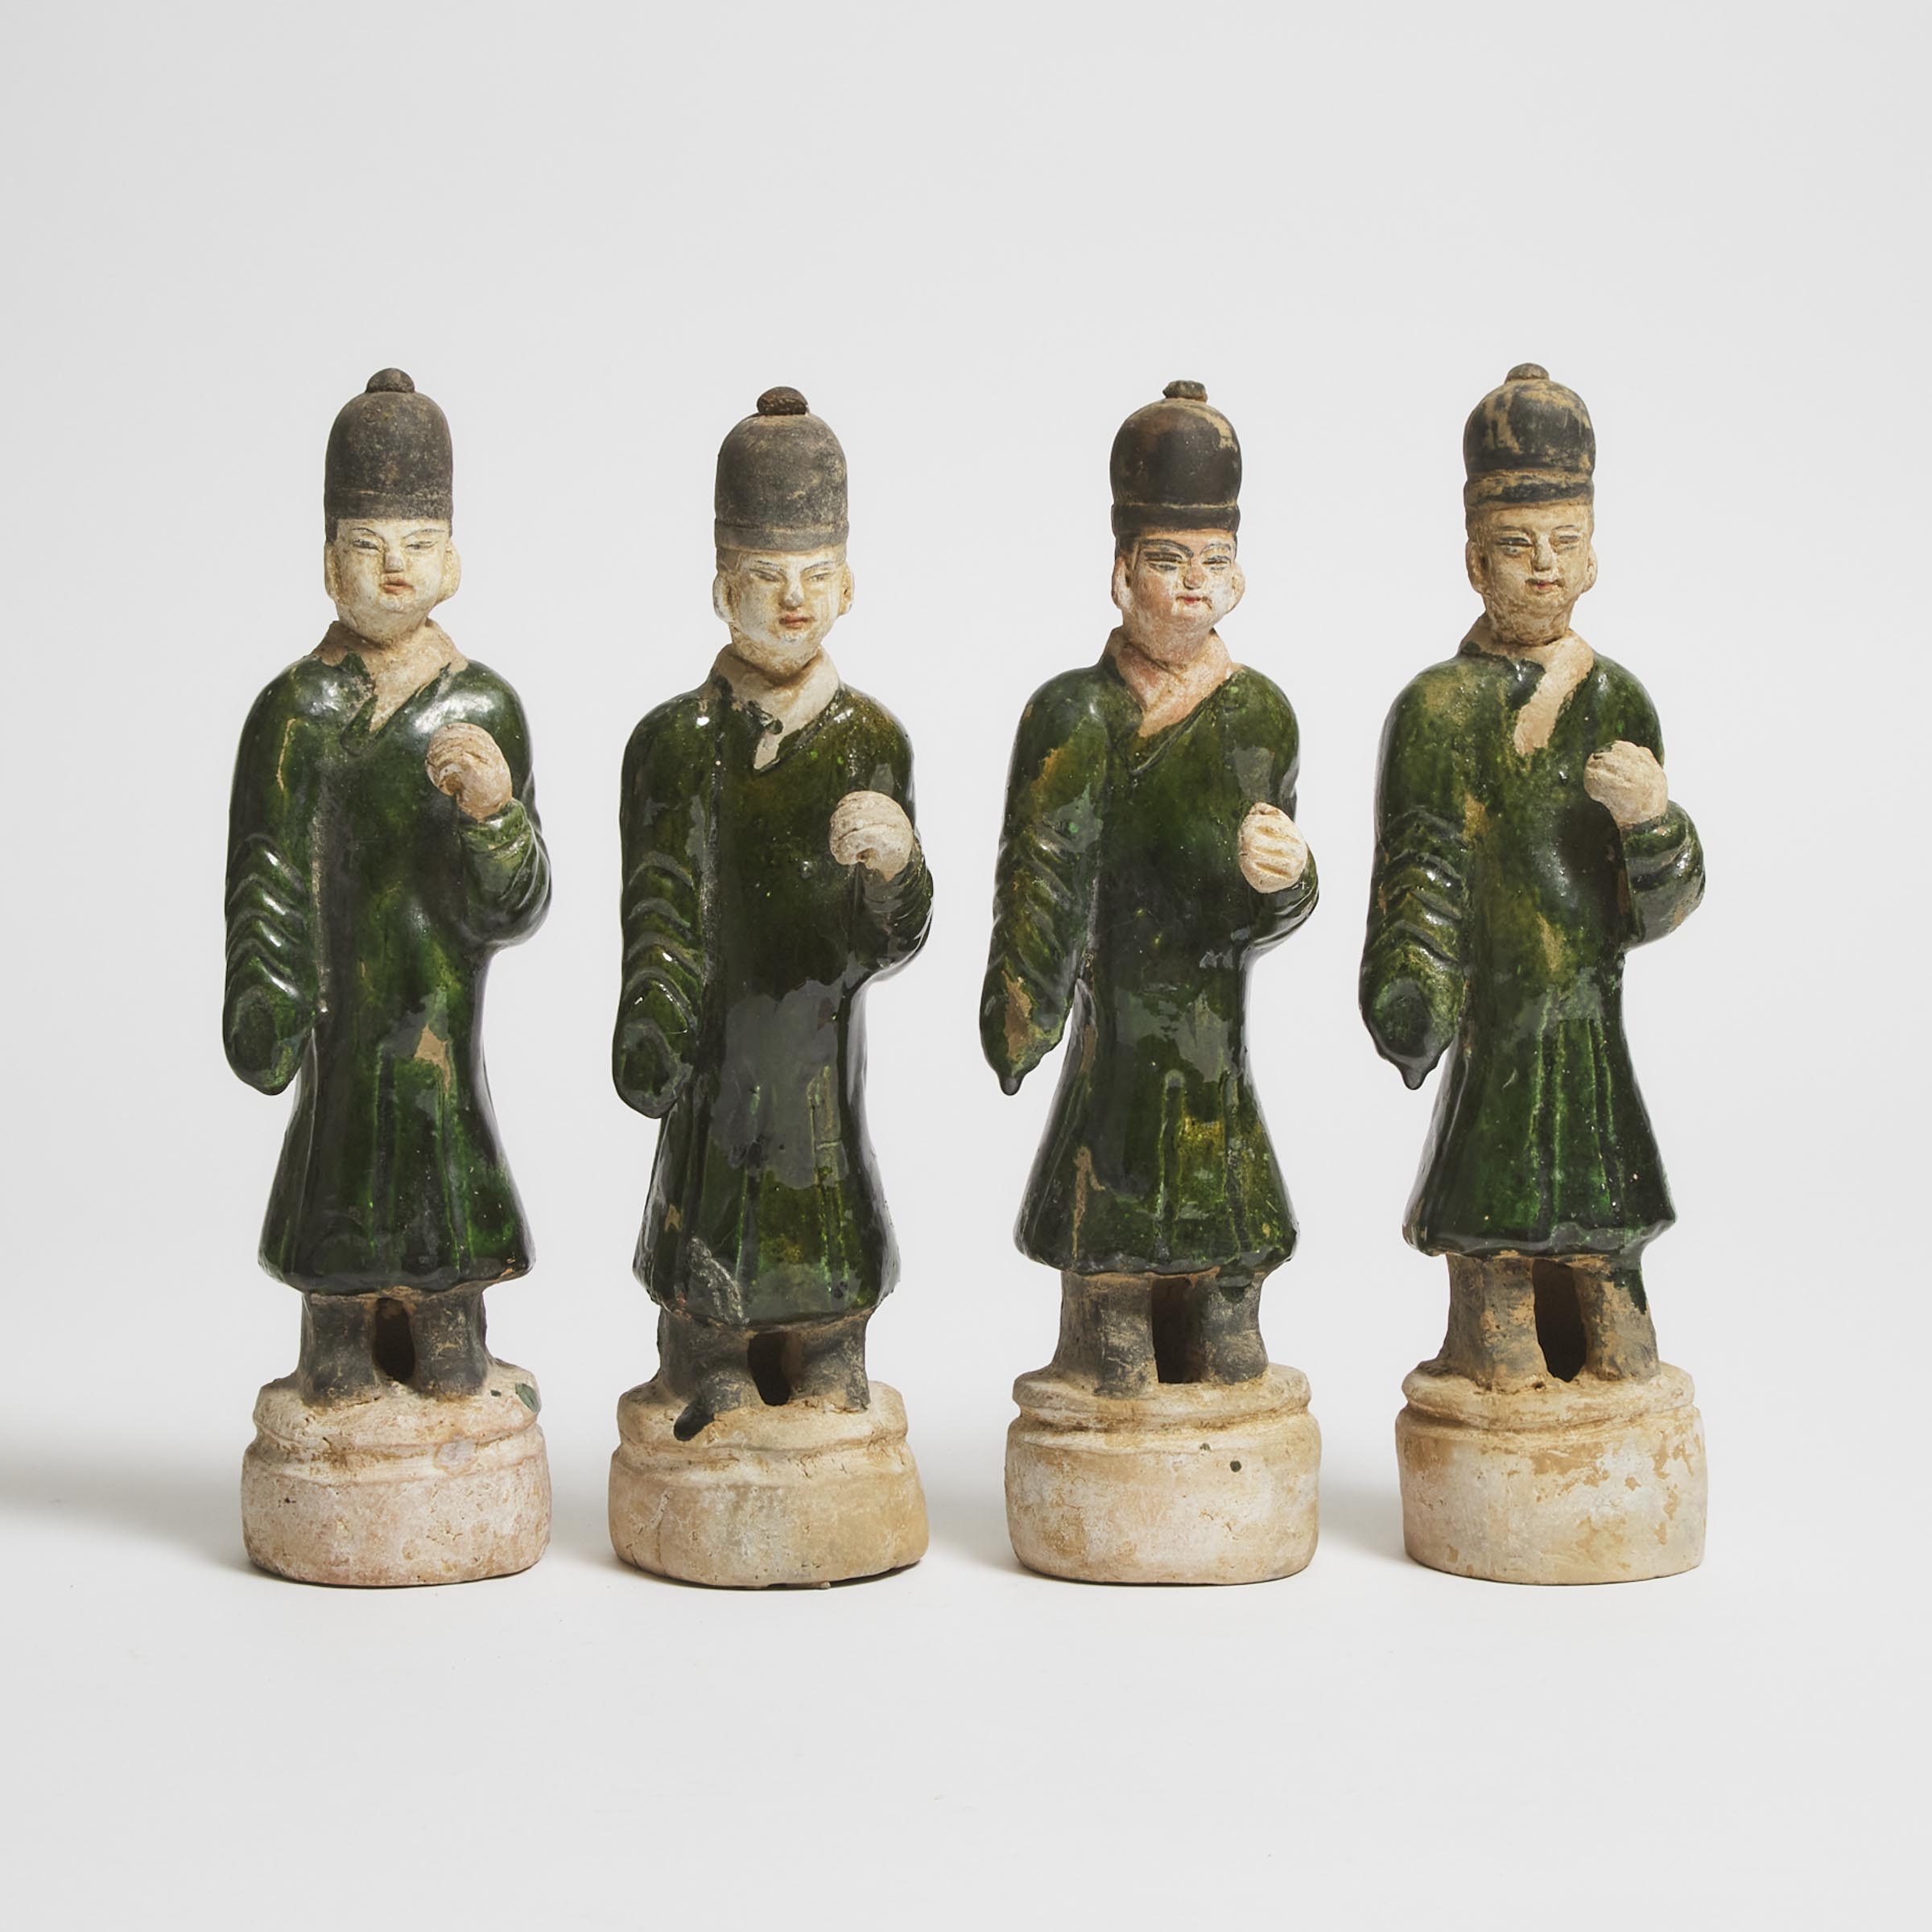 A Group of Four Green-Glazed Pottery Figures, Ming Dynasty (1368-1644)